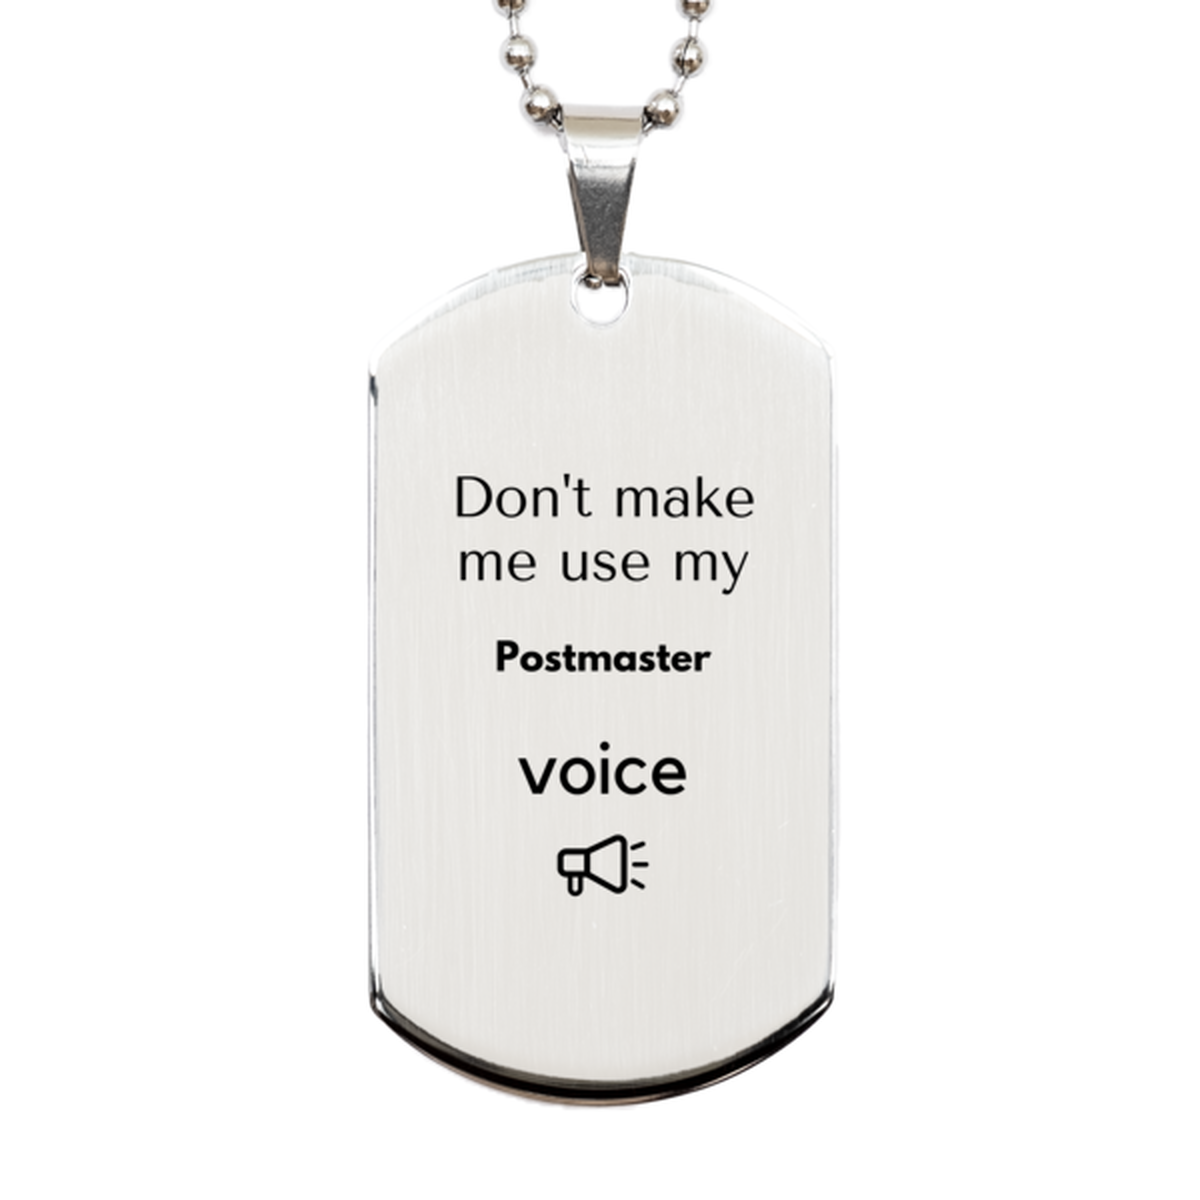 Don't make me use my Postmaster voice, Sarcasm Postmaster Gifts, Christmas Postmaster Silver Dog Tag Birthday Unique Gifts For Postmaster Coworkers, Men, Women, Colleague, Friends